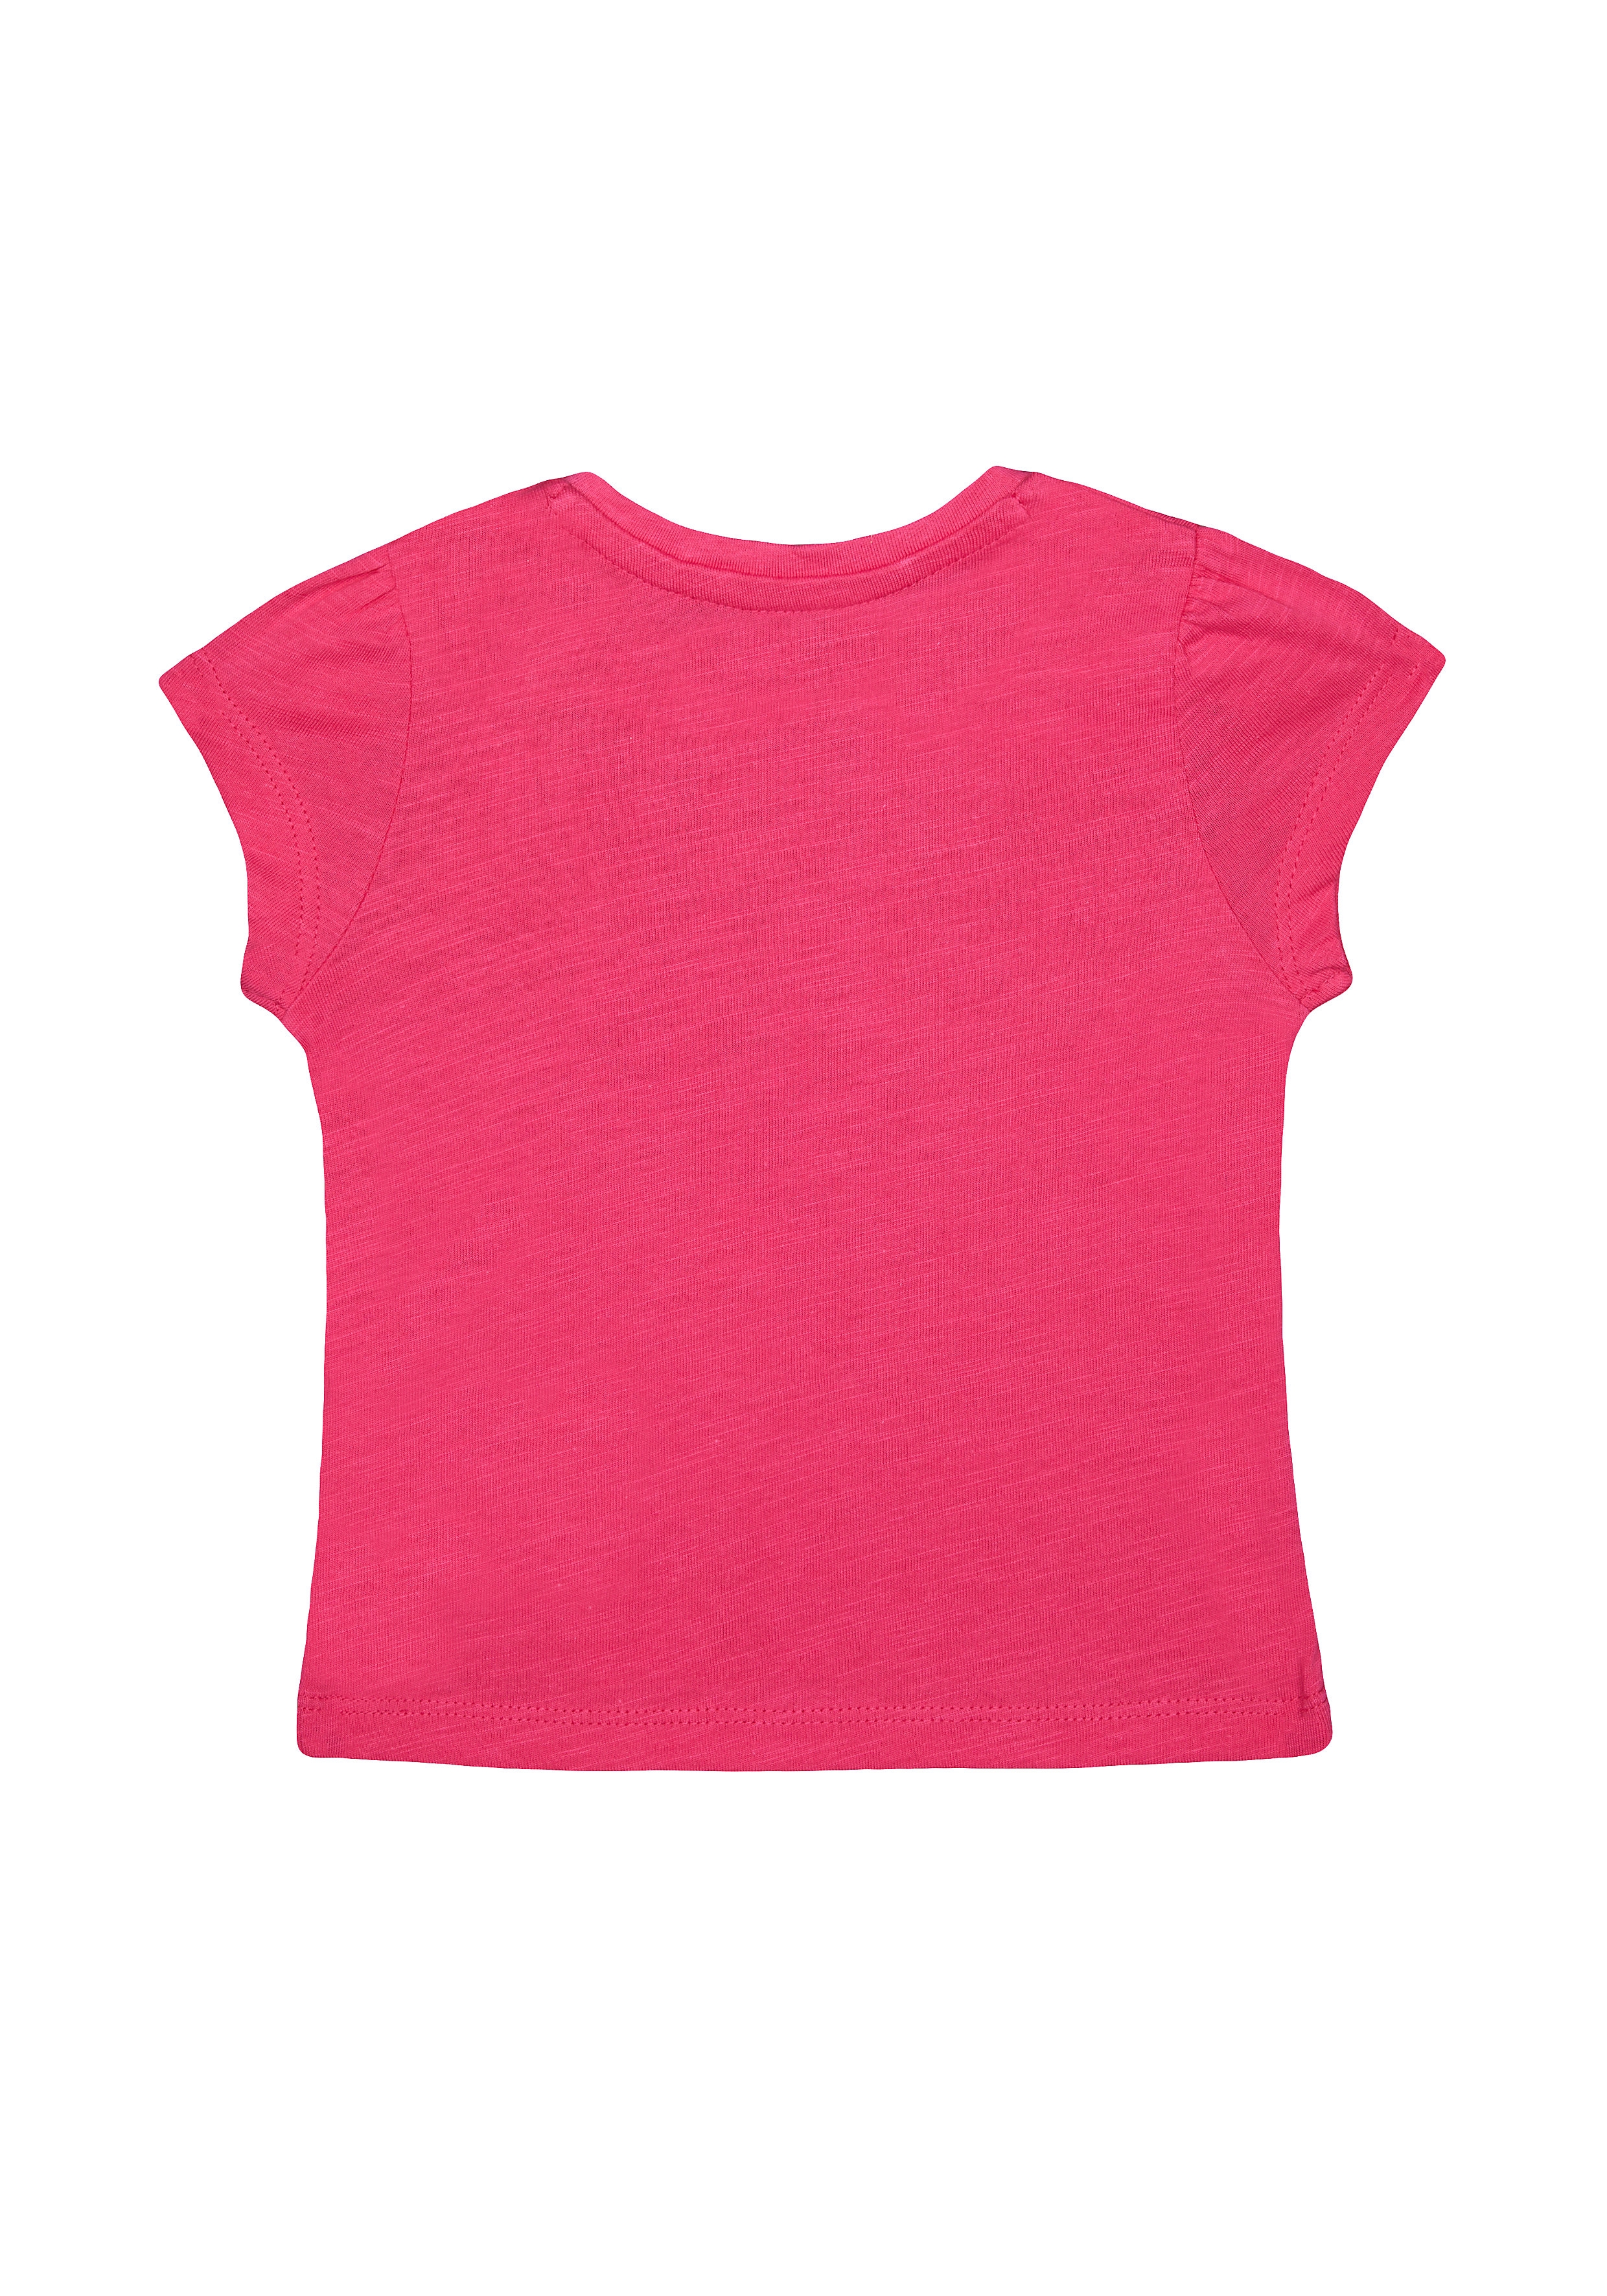 Mothercare | Girls Half Sleeves T-Shirt Glitter Floral Print - Pink 1